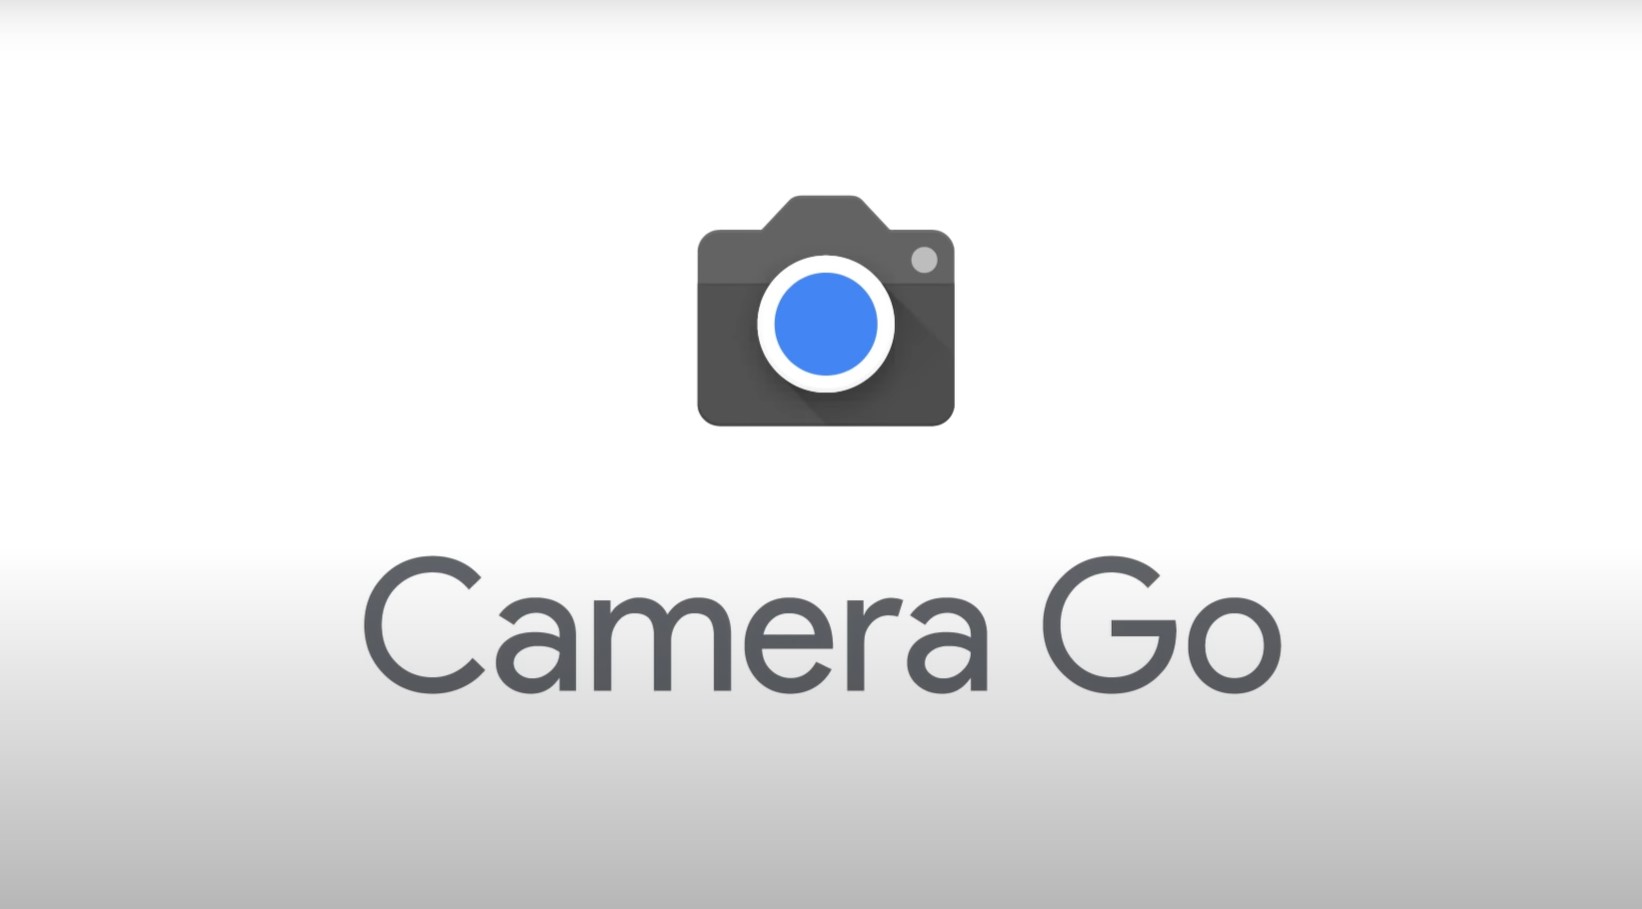 Google Camera Go on Android (Go edition) APK download